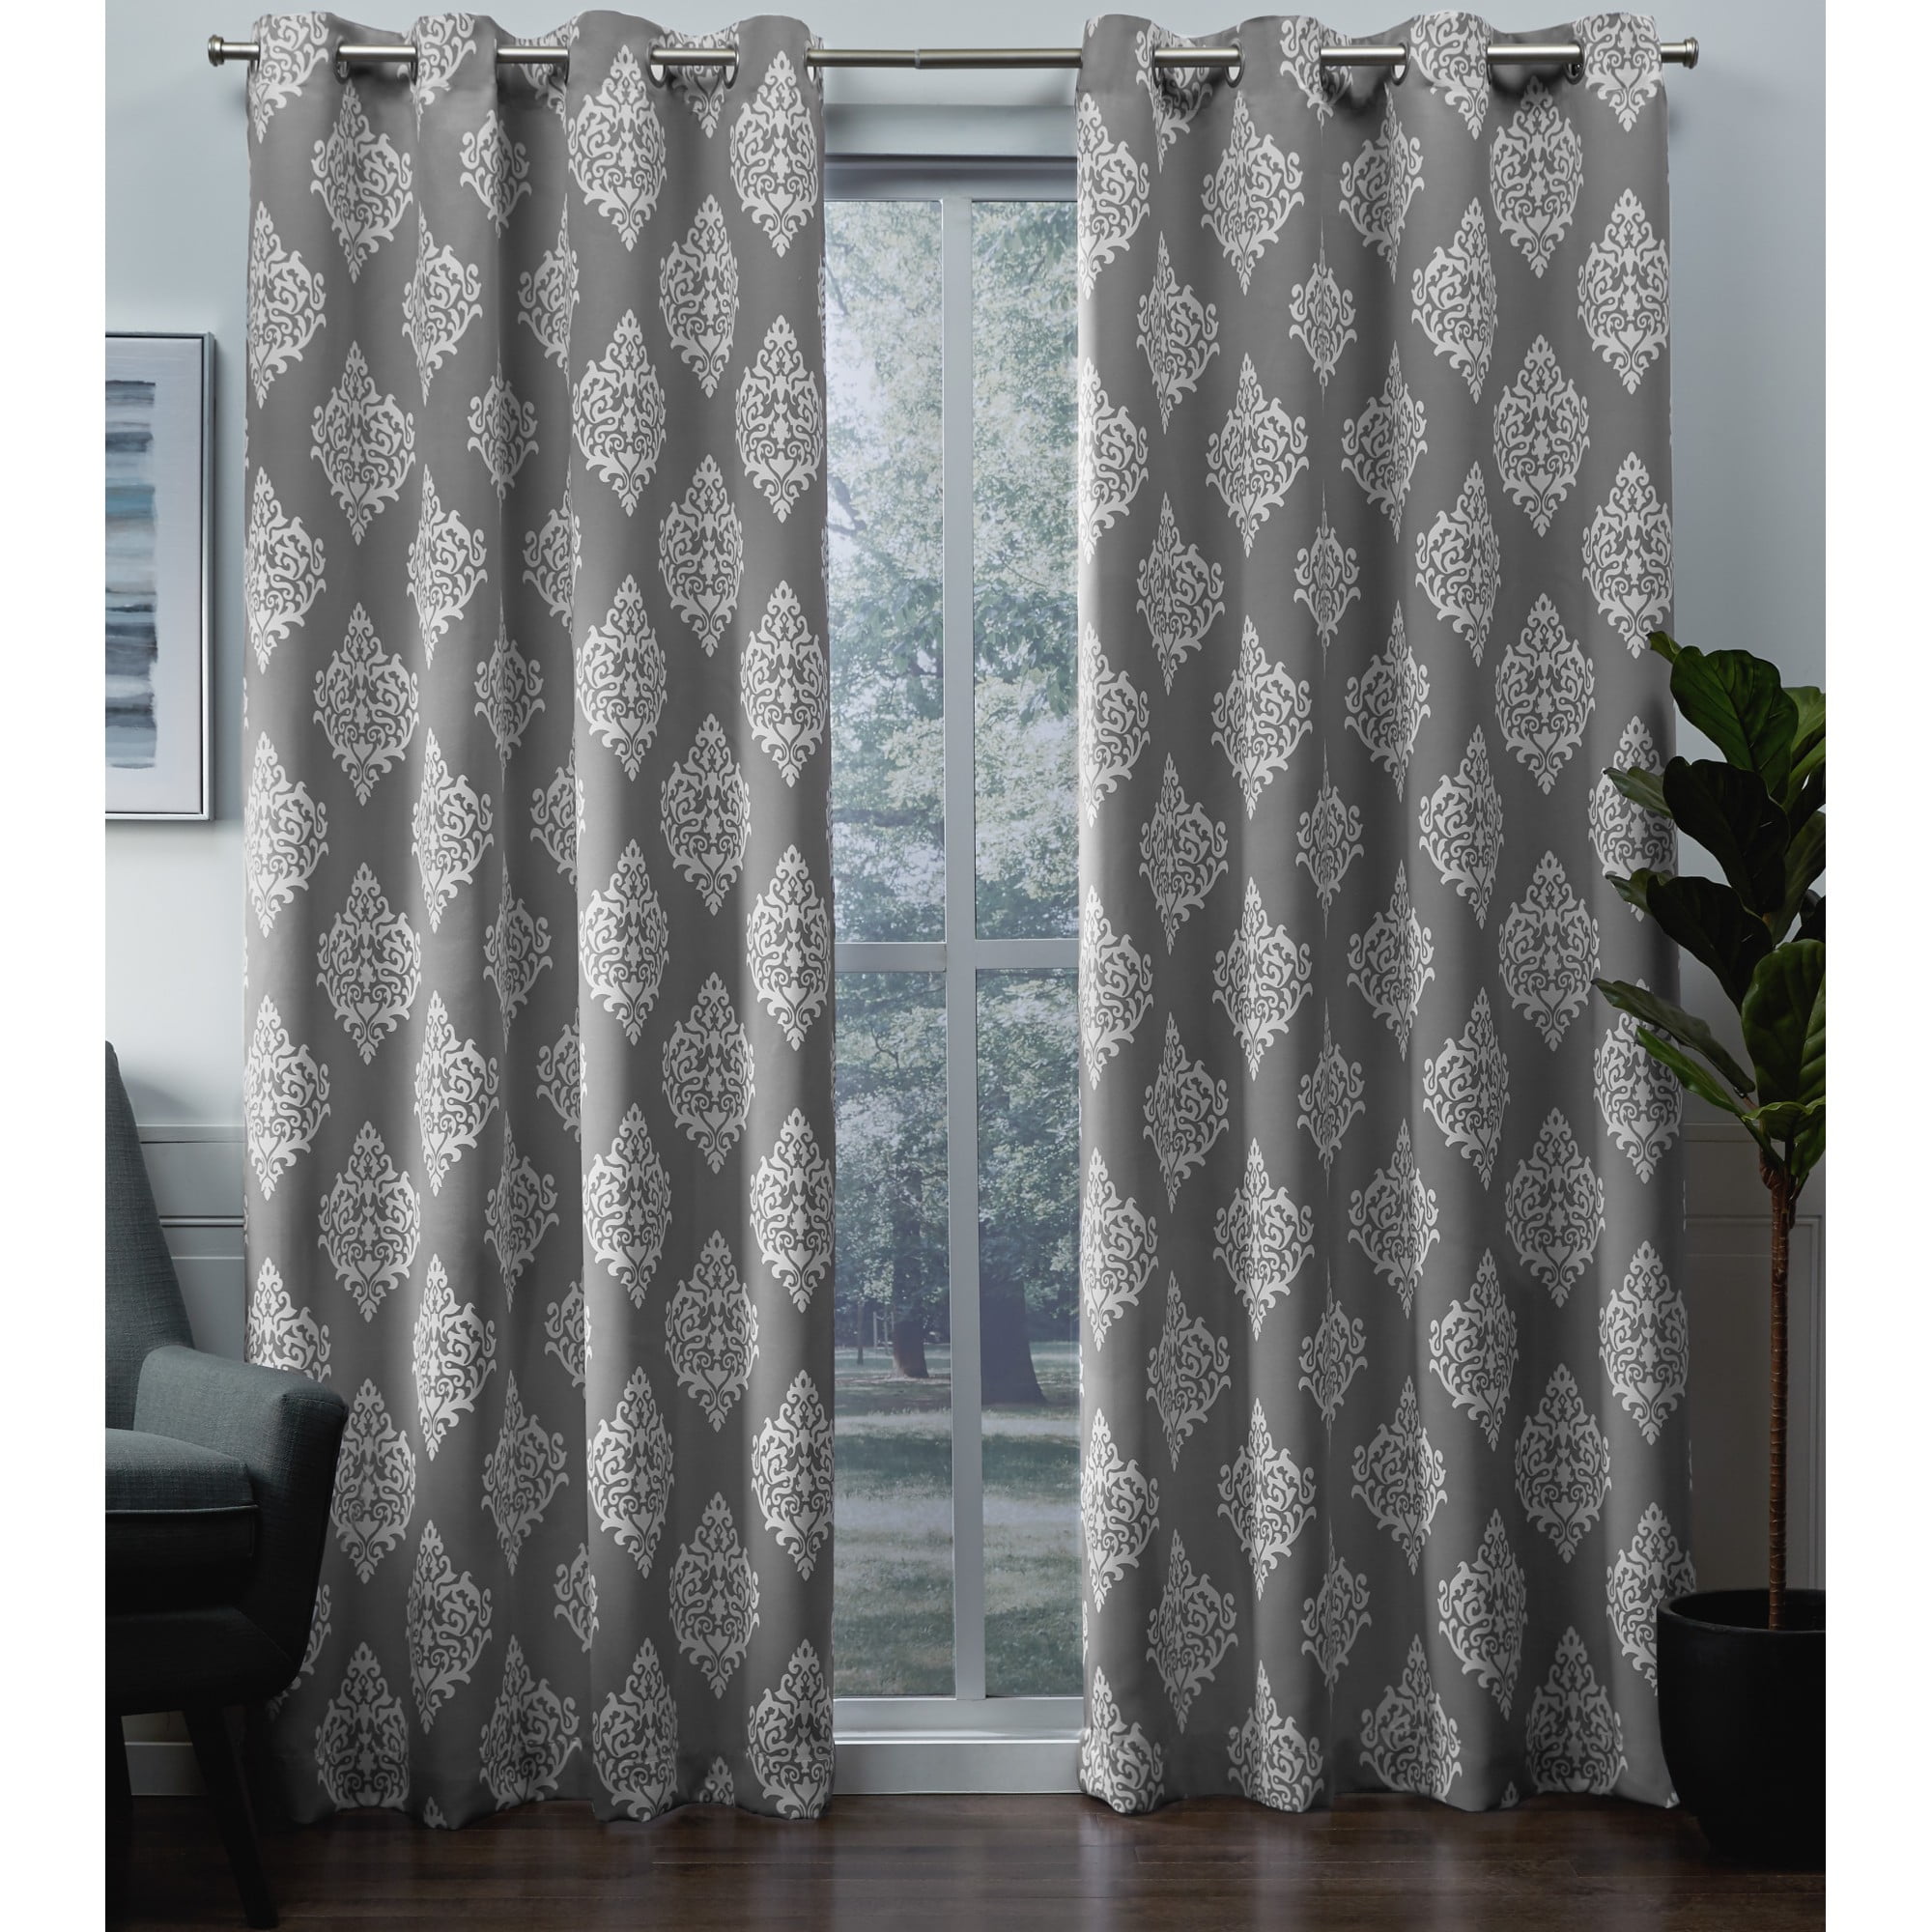 Grommet Window Curtain Panels 2 Set of Two Charcoal Gray with White Medallion 